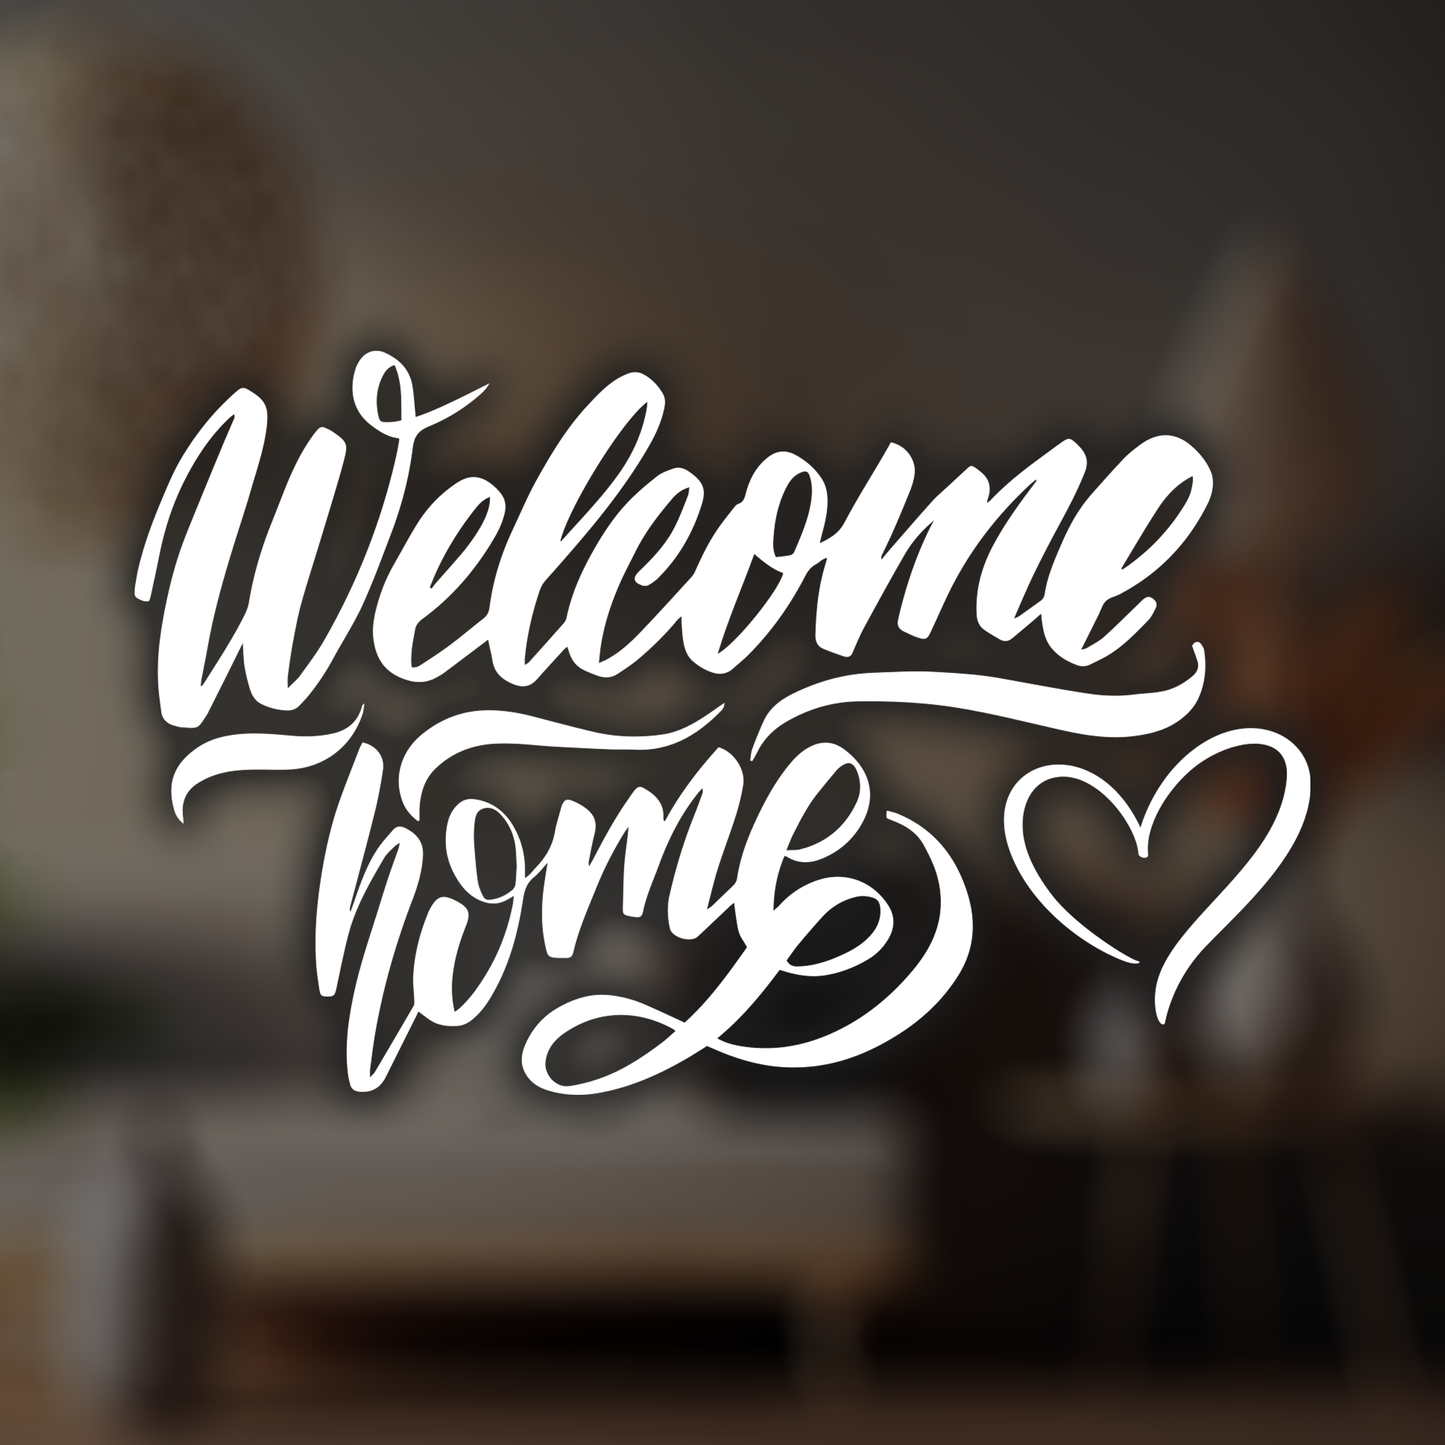 Welcome Home Wall Sticker Decal